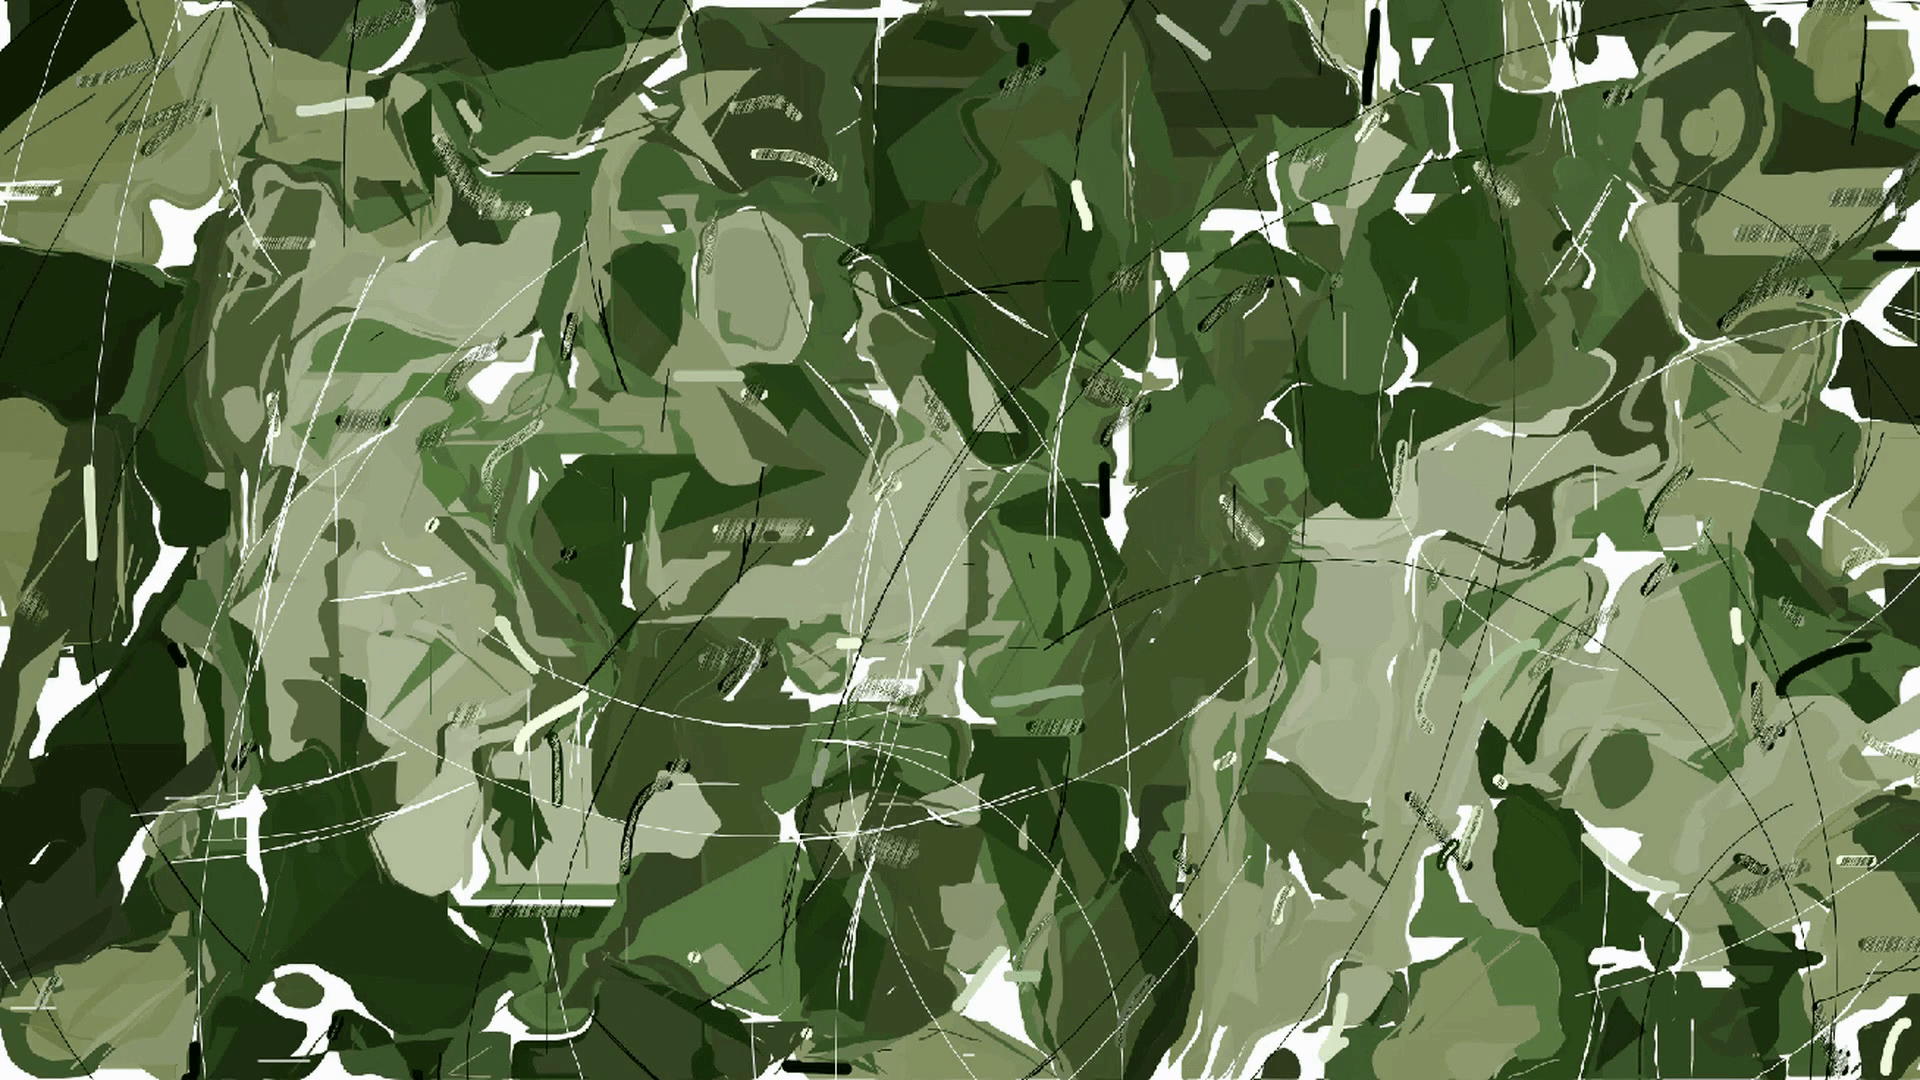 Moving camouflage background forms by abstract animated shapes. From